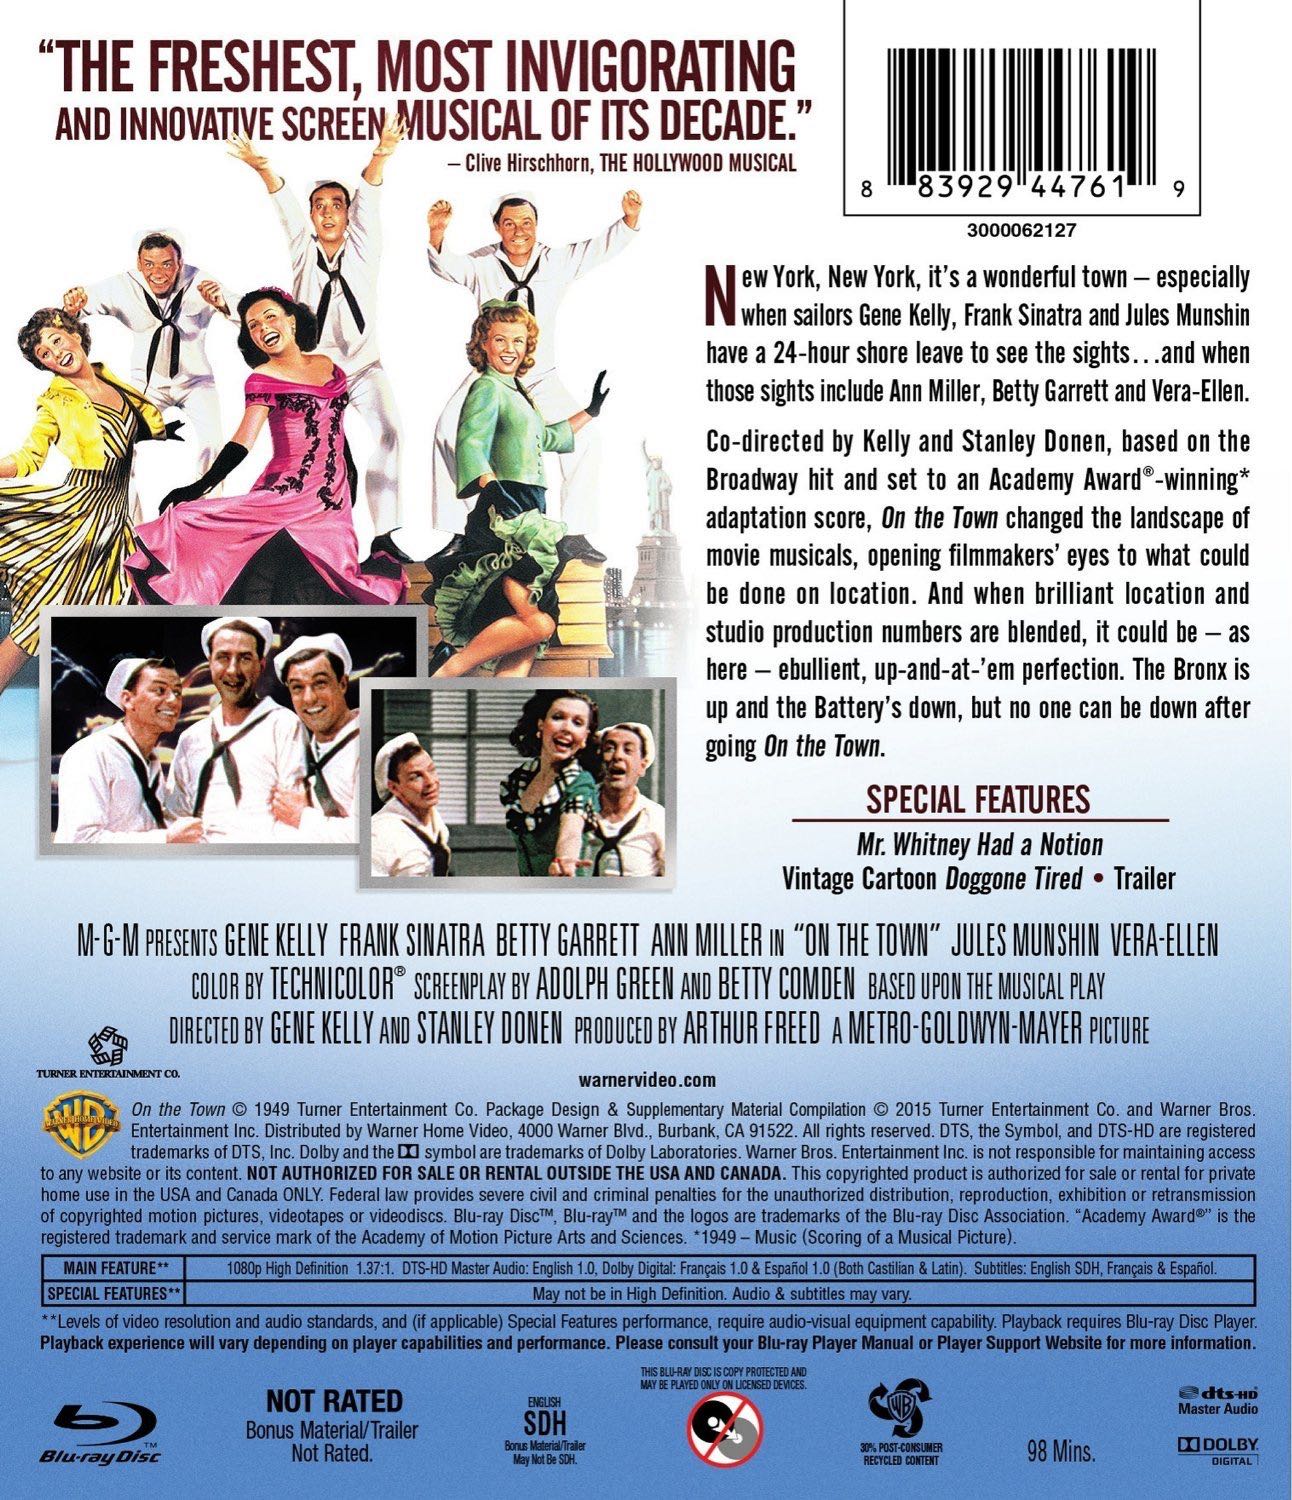 On The Town Blu-ray movie collectible [Barcode 883929447619] - Main Image 2